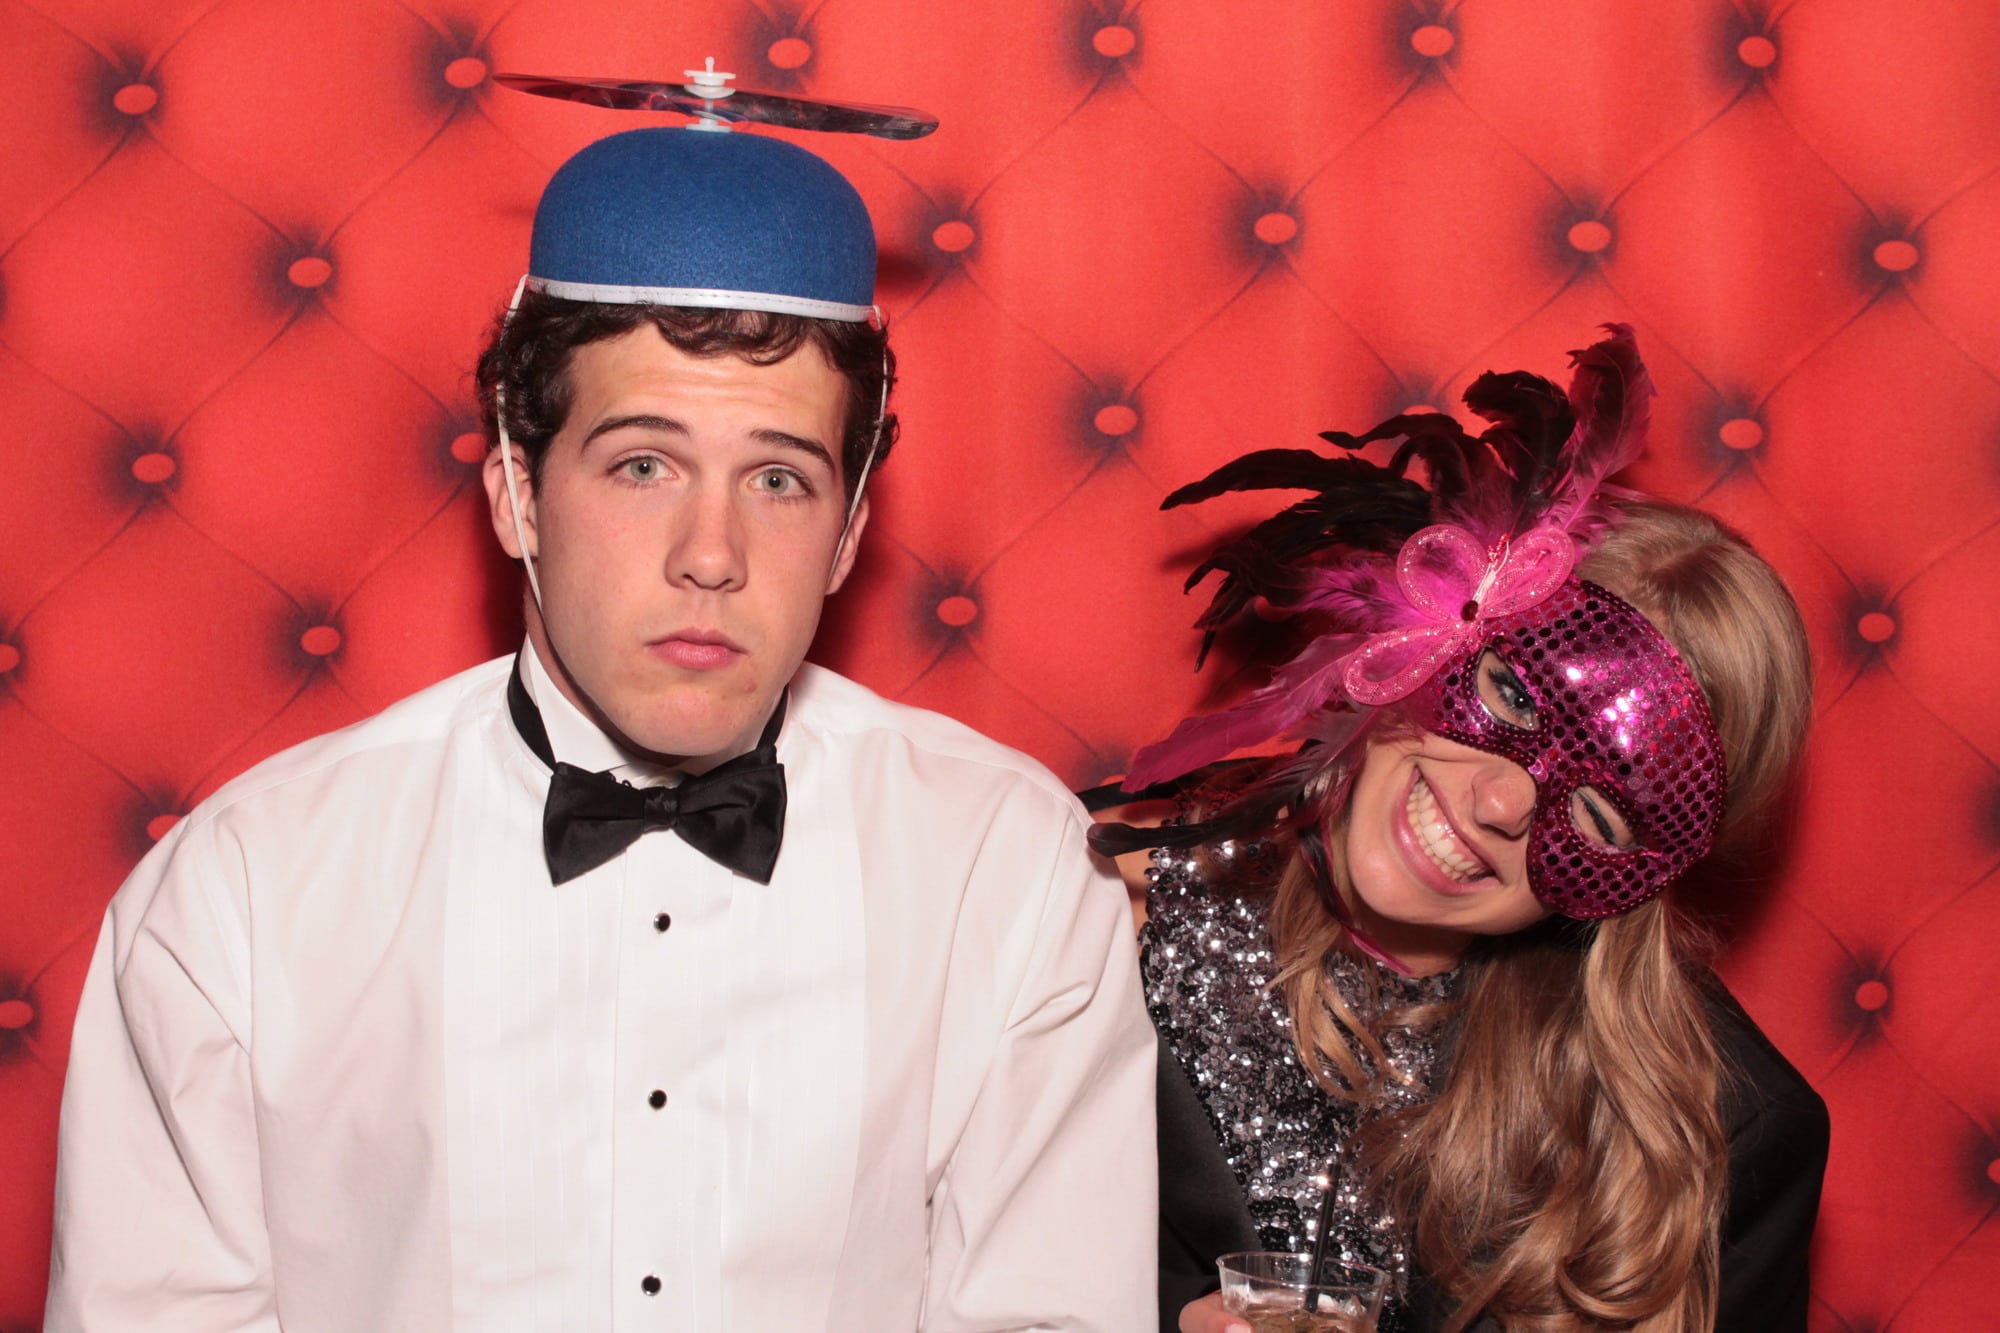 Photo Booth Rental-Couple-University-Formal-Sorority-Large-Props-Smiling